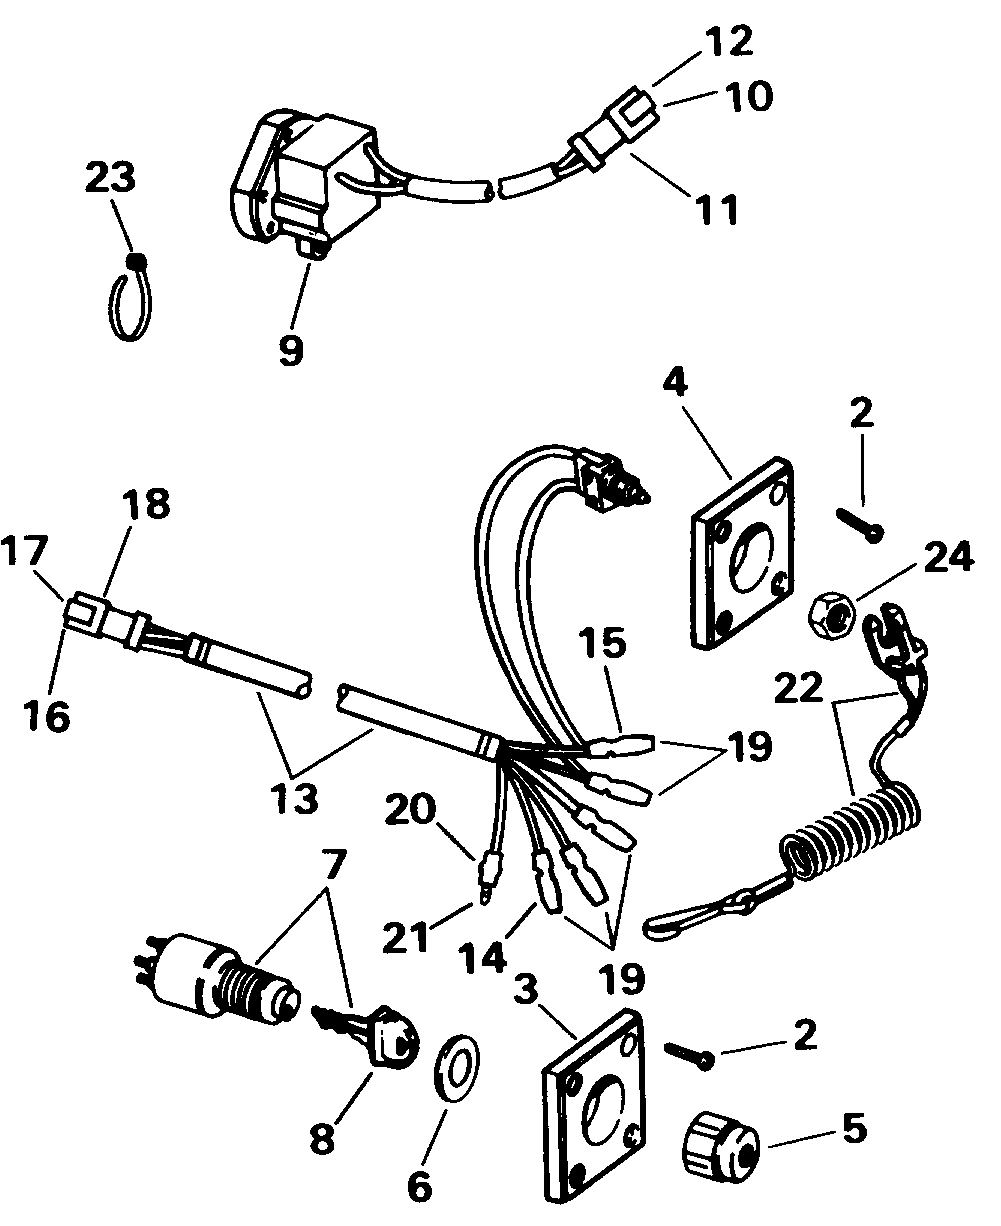 Ignition Switch Kit -- Single Bezel Electrical 1998 Accessories For - Johnson Ignition Switch Wiring Diagram